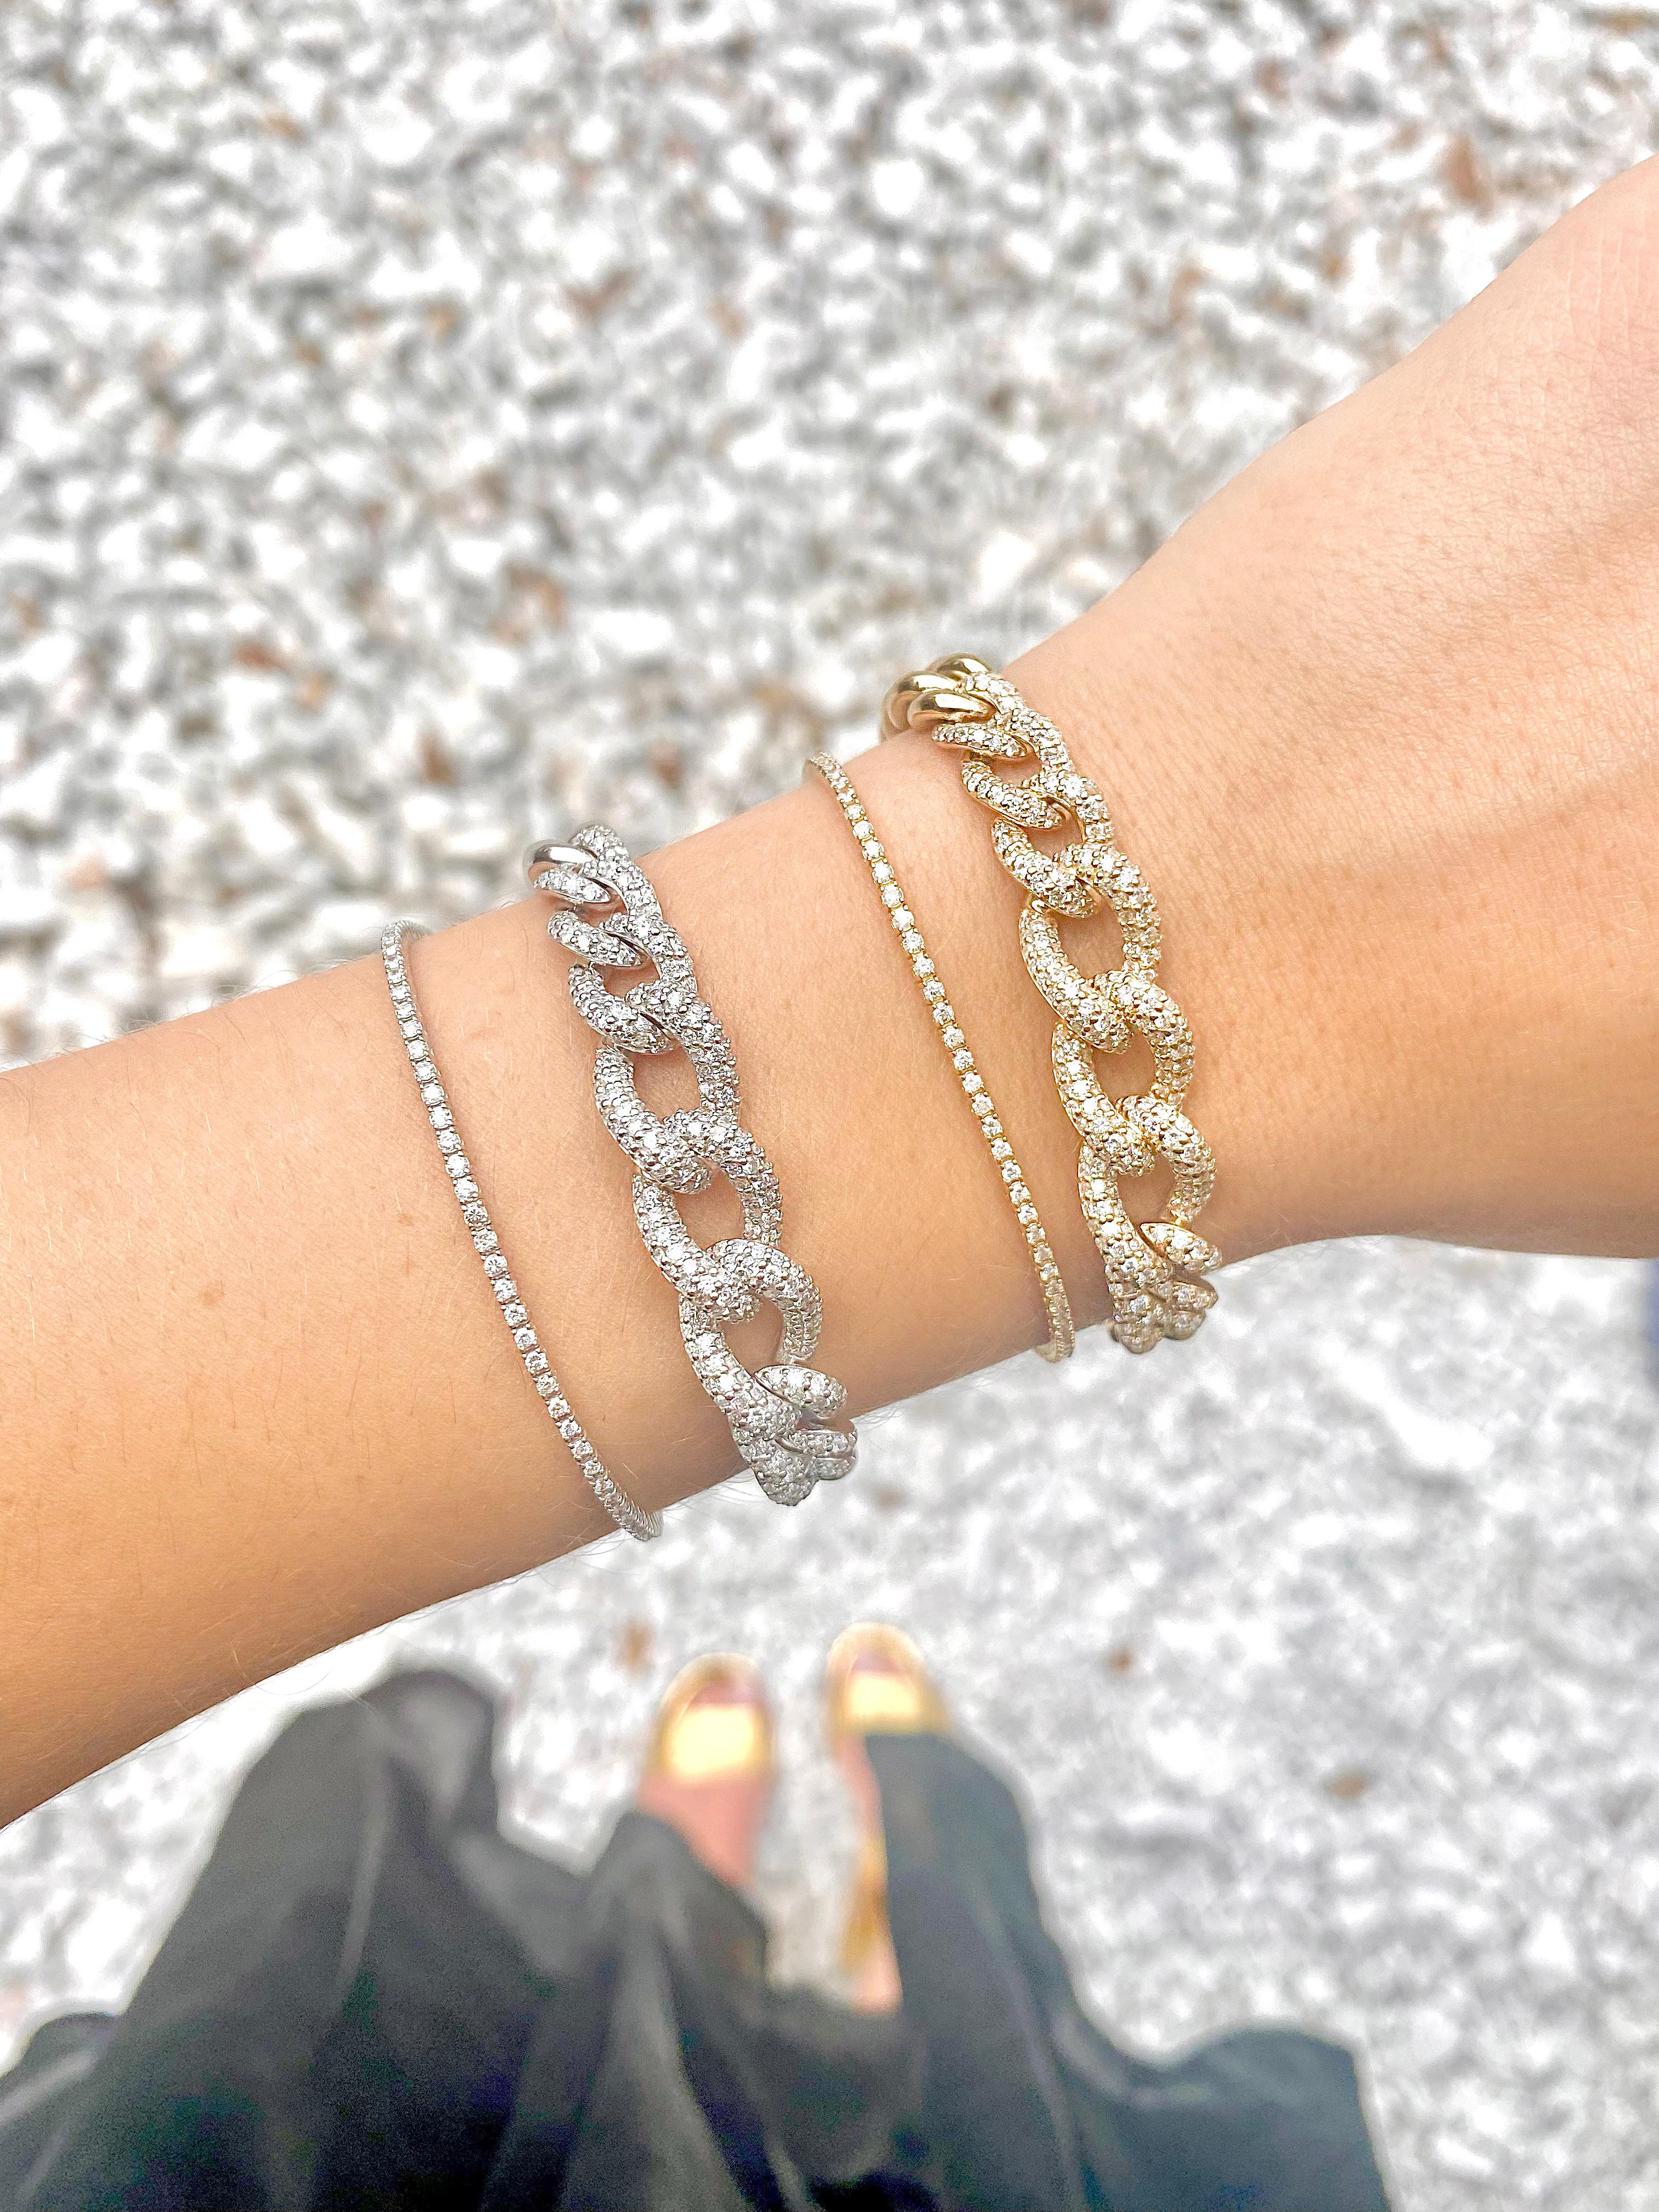 One carat tennis bracelet is a perfect addition to your jewelry wardrobe. A string of diamonds around your wrist will look perfect with your luxury watch or paired with other bracelets! The 103 round brilliant cut diamonds are awesome quality! There